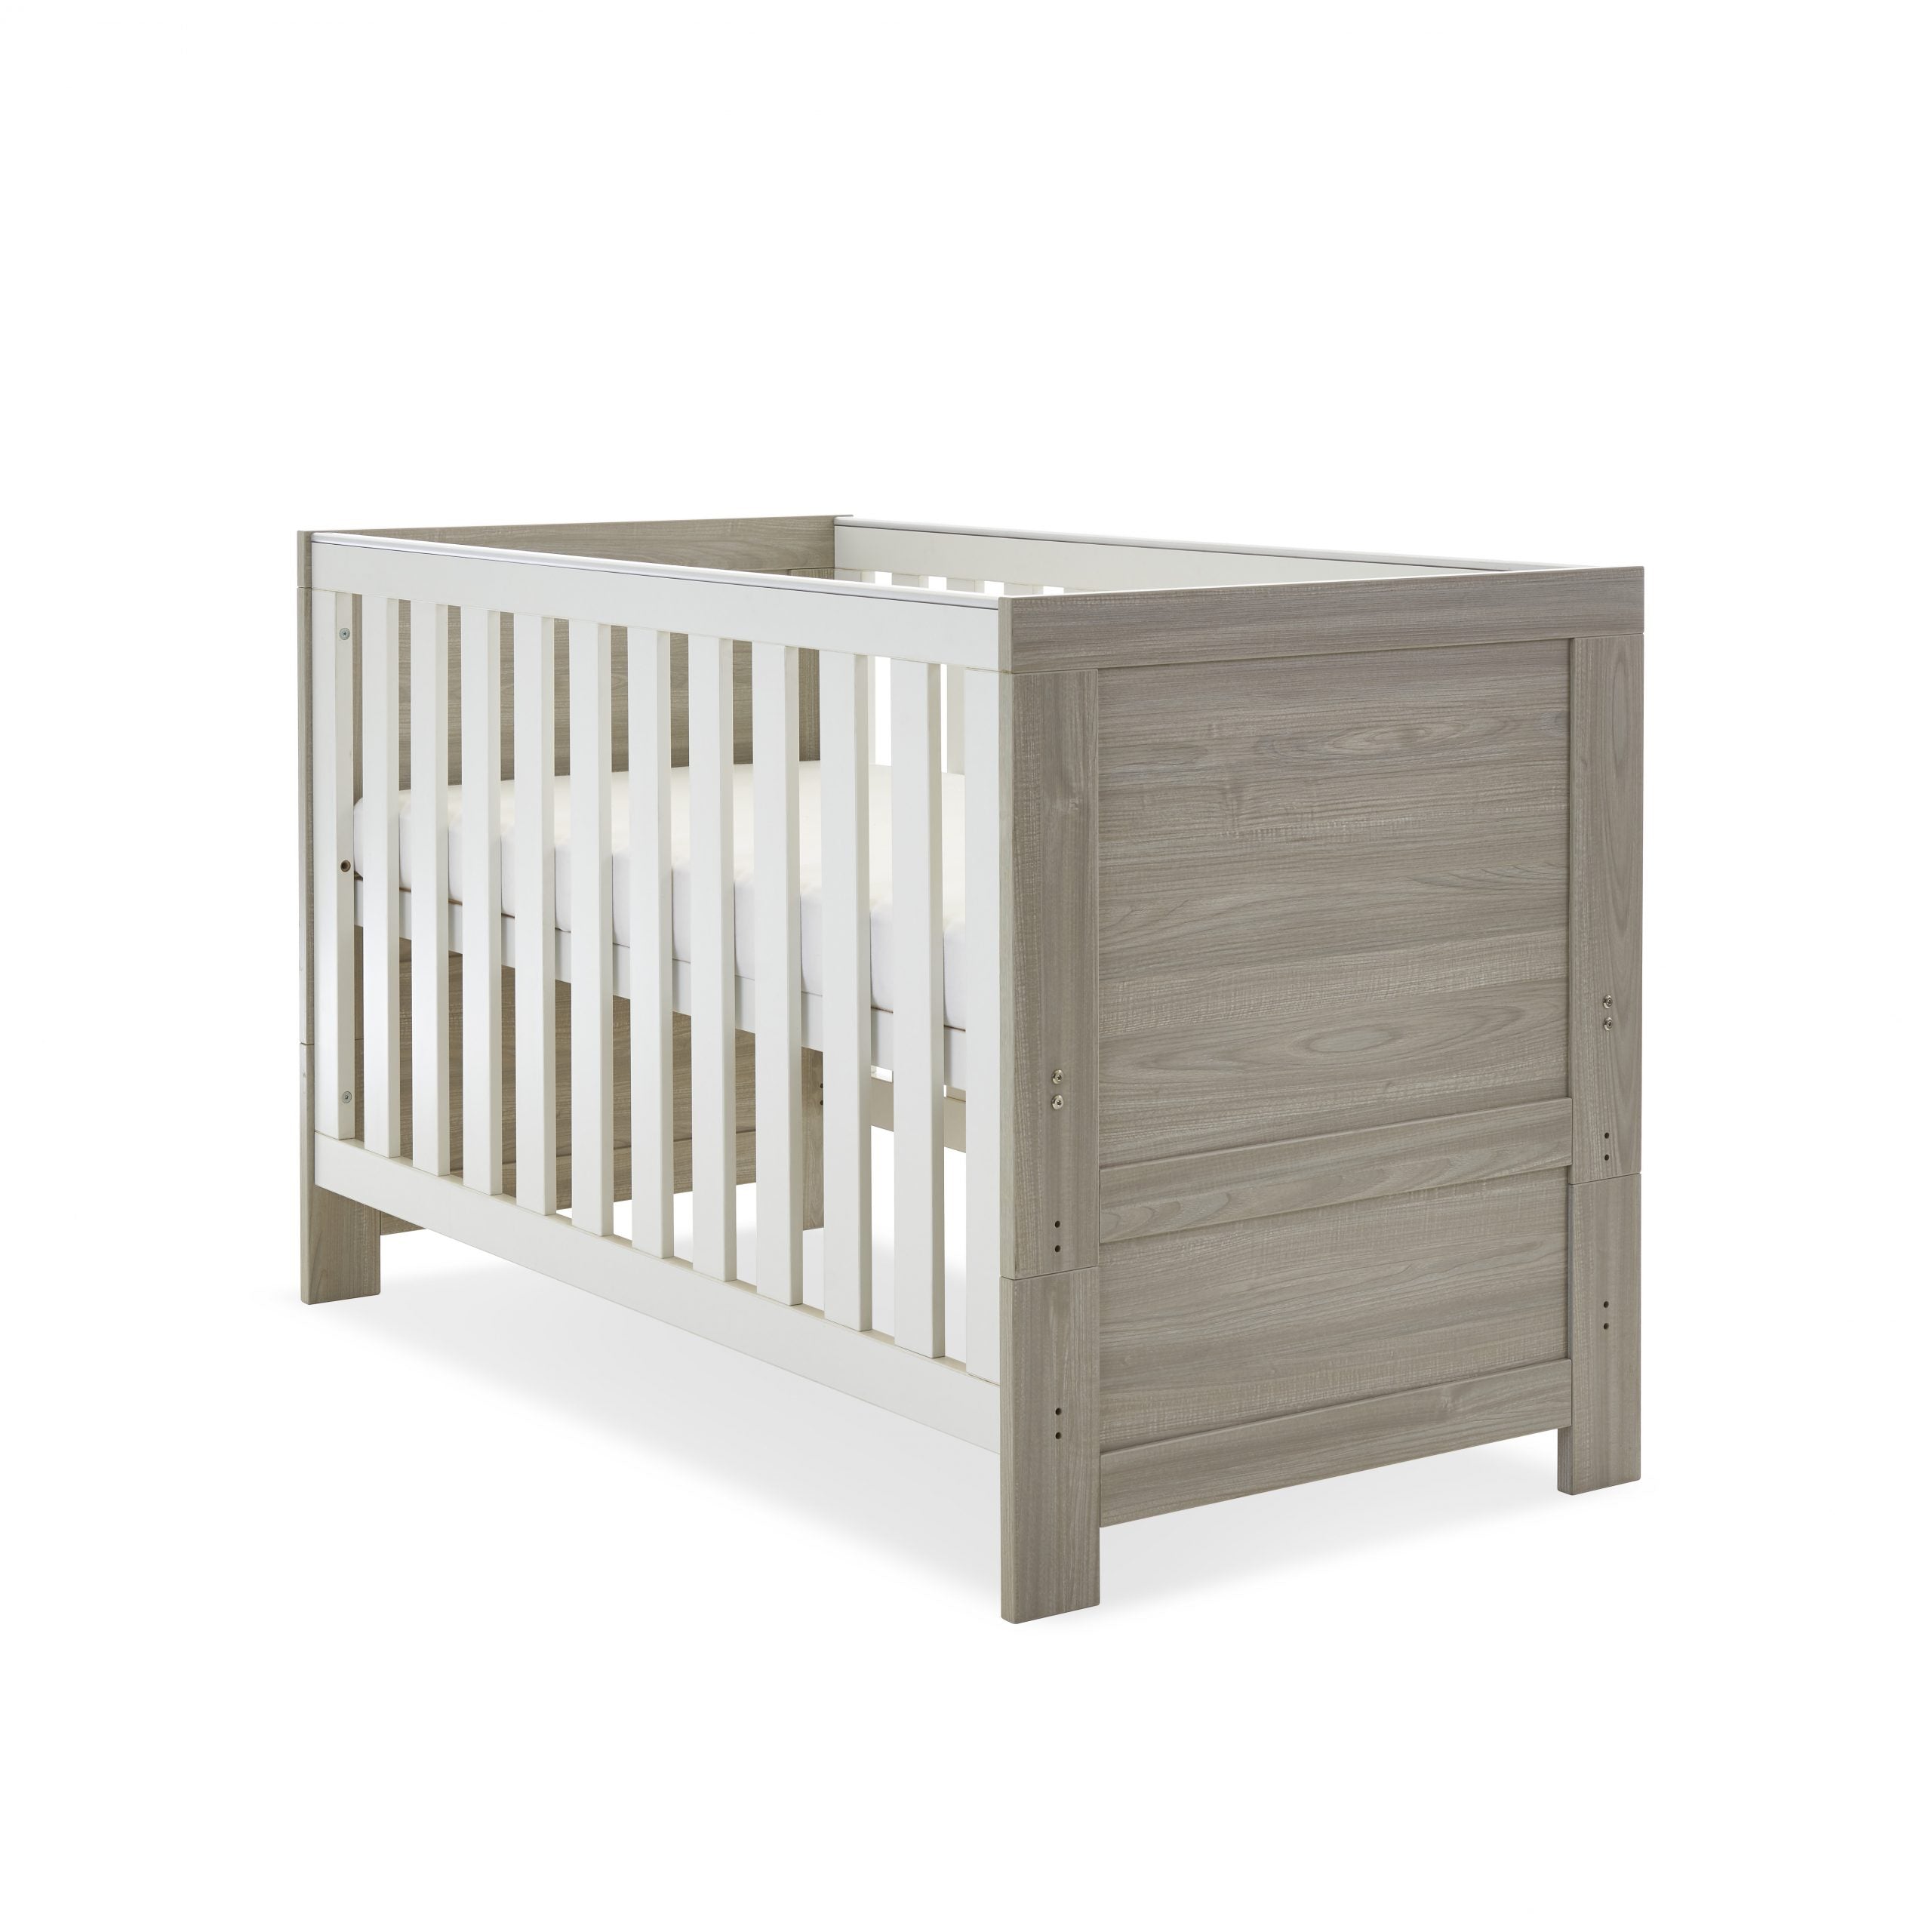 Obaby Nika Cot Bed - Grey Wash with White